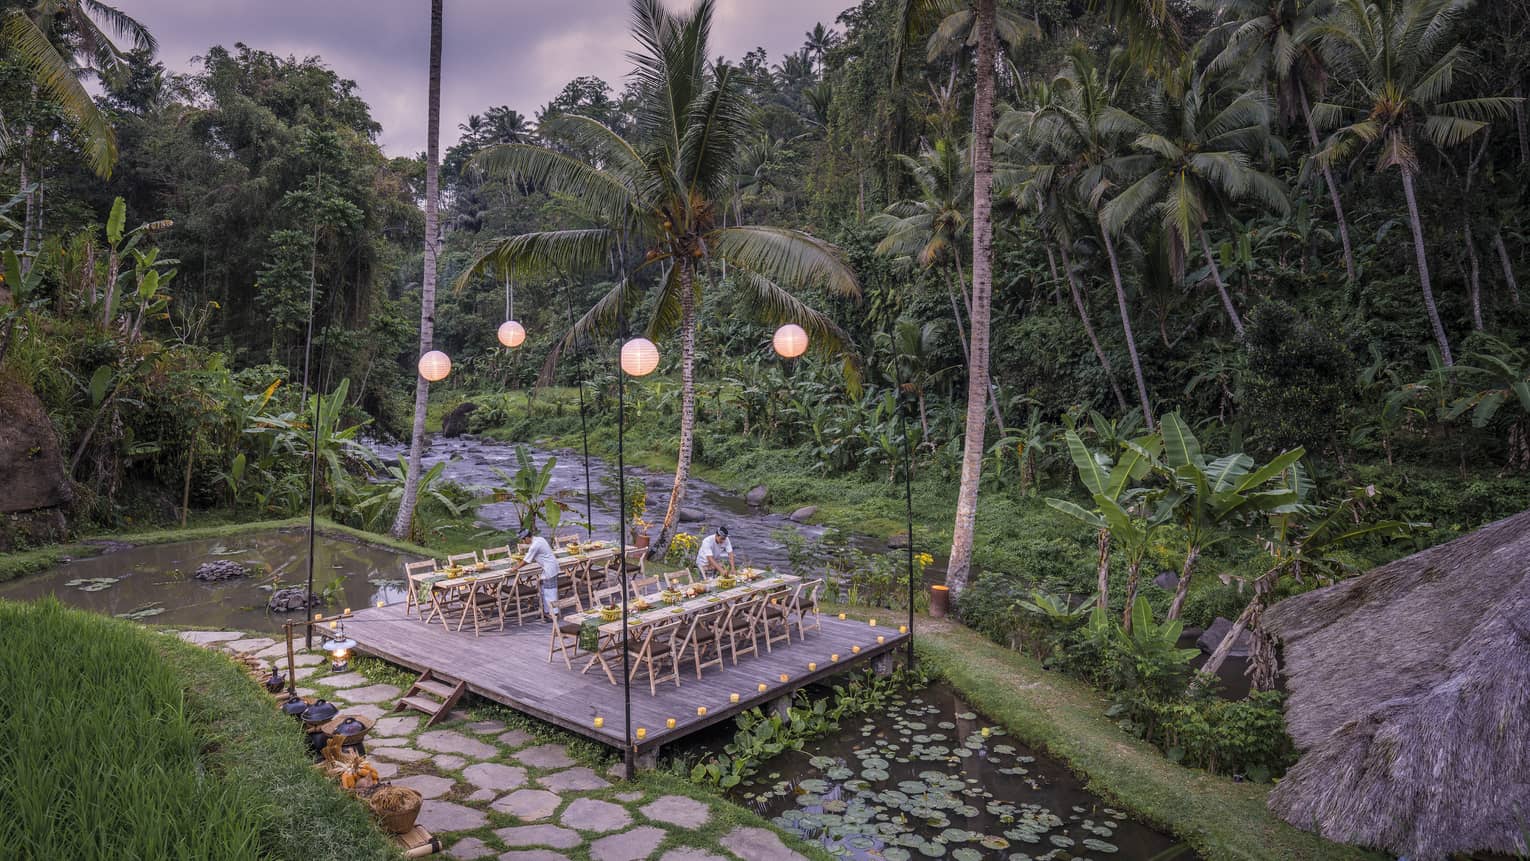 Megibung Dinner is set on a wooden deck as the sun sets beyond lush trees